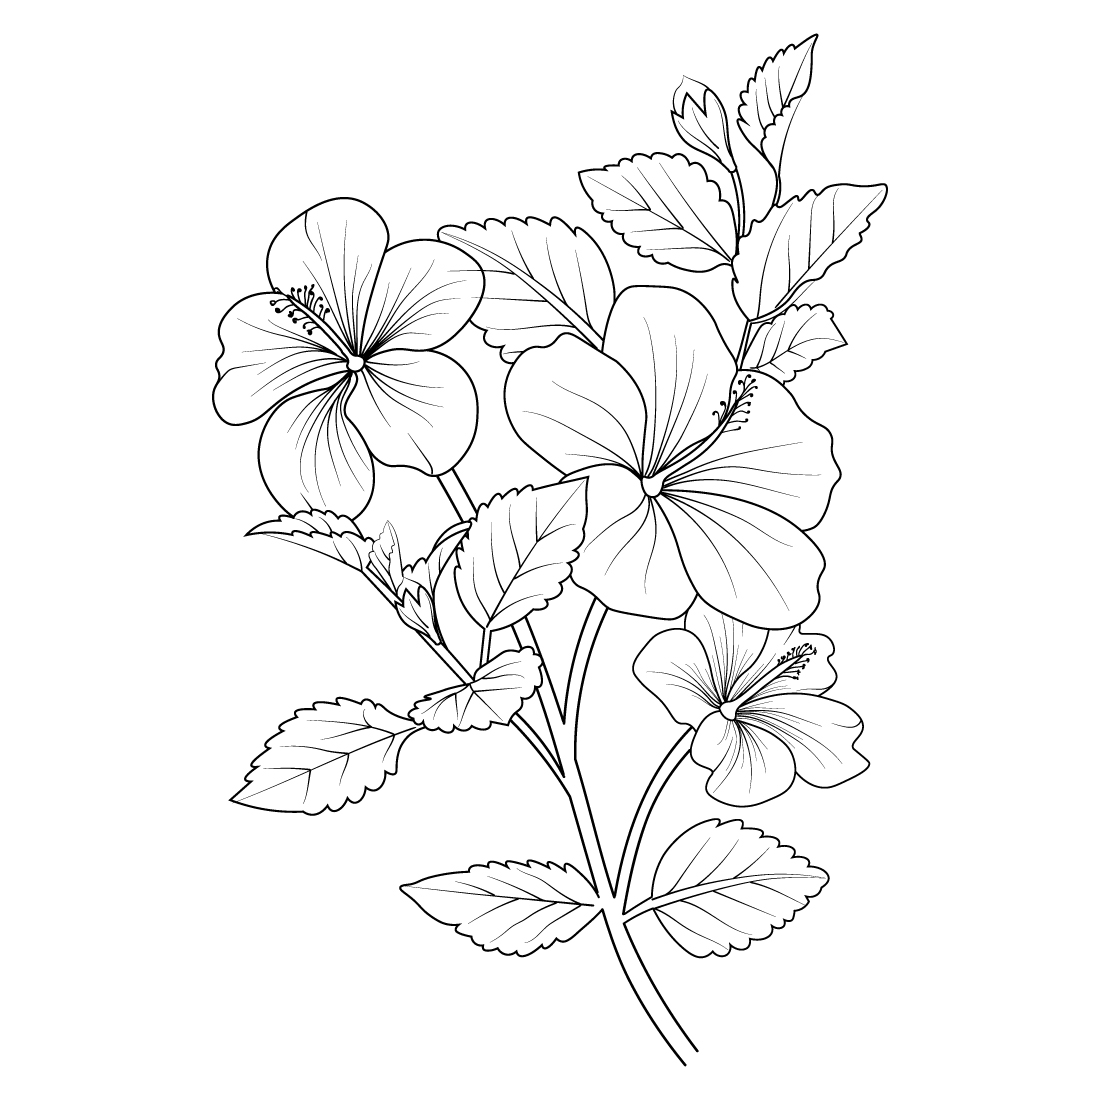 Isolated hibiscus hand-drawn vector sketch illustration, botanic collection branch of leaf buds natural collection coloring page preview image.